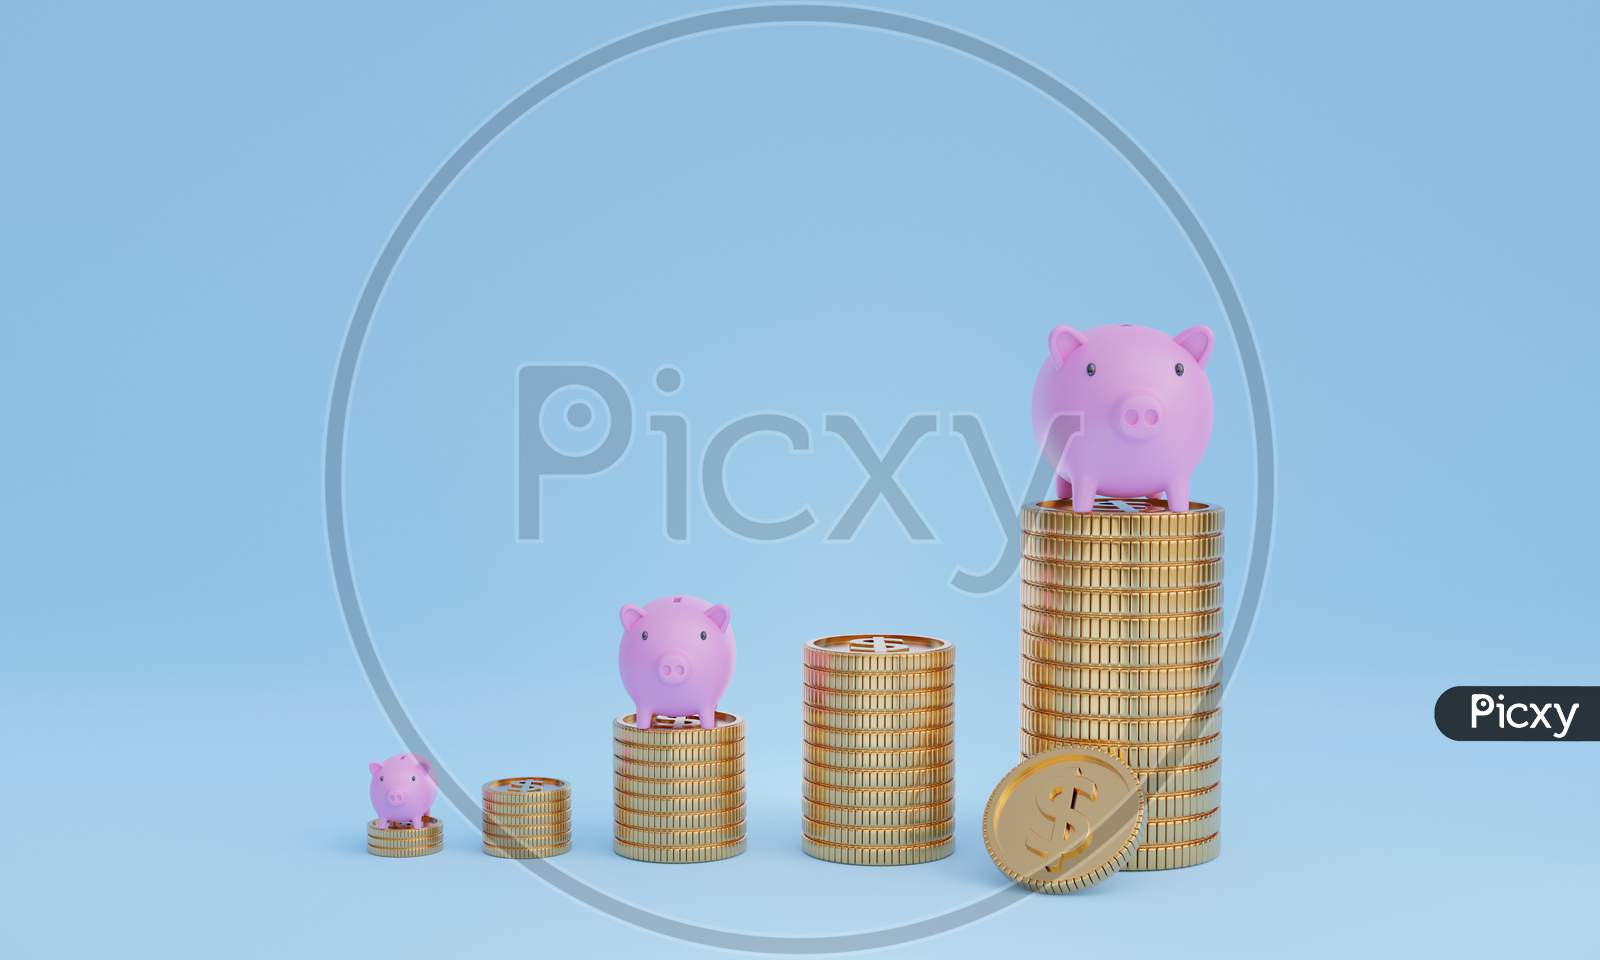 3D Render Image Of Coin Stacks With Piggy Bank, Concept Of Saving Or Investment